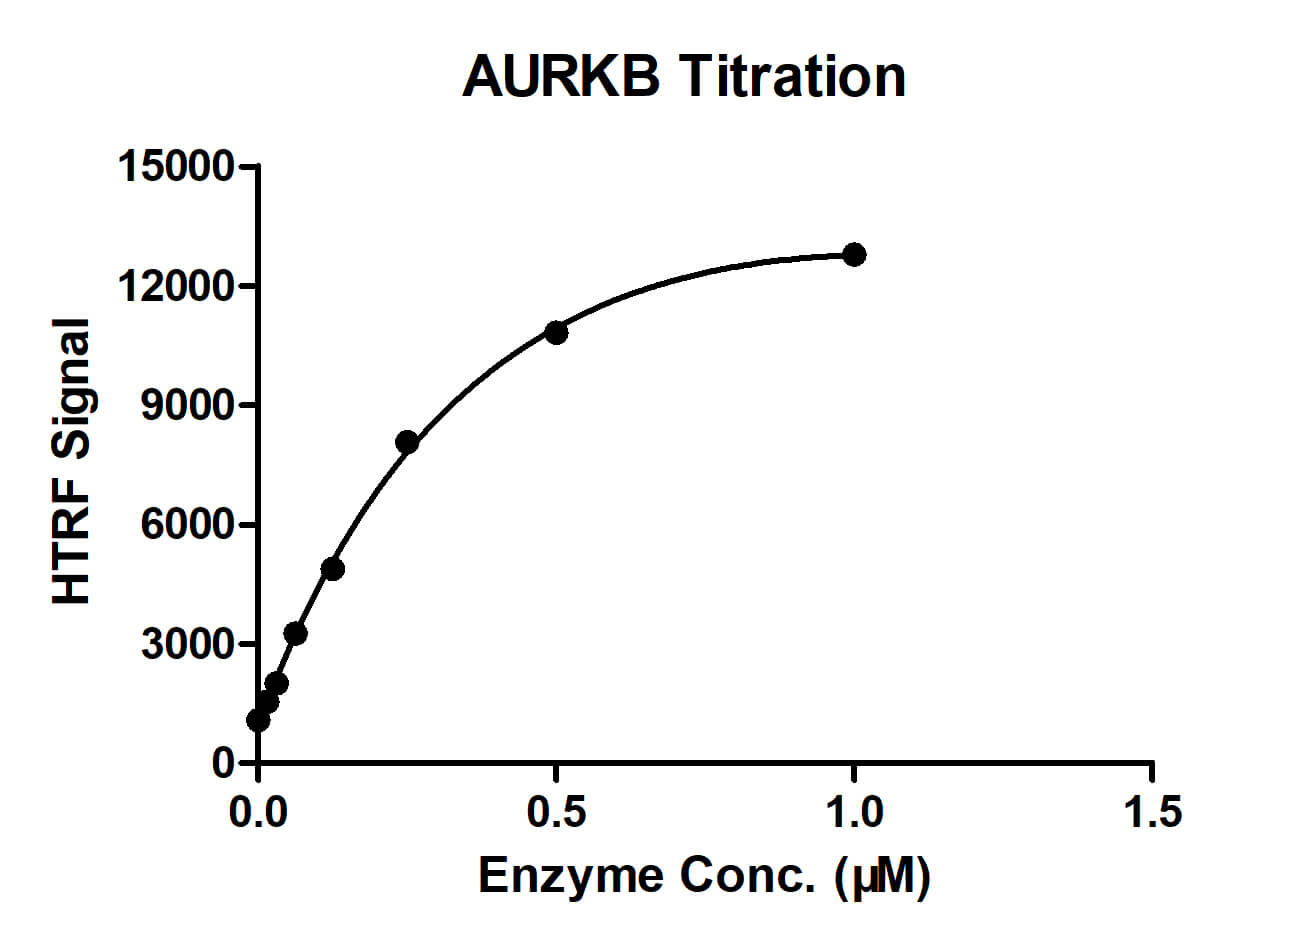 HTRF assay for AURKB activity 1 uM STK S2 substrate was incubated with different concentrations of AURKB protein in a 10 ul reaction system containing 1×Enzymatic Buffer, 5 mM MgCl2, 1 mM DTT and 100 μM ATP for 1 hour. The 10 ul detection reagents containing STK antibody (1:2) and SA-XL665 (1:100) diluted with 1× Detection Buffer were added and incubated with the reactions for 30 min. All the operations and reactions were performed at room temperature. HTRF assay was used for detection.